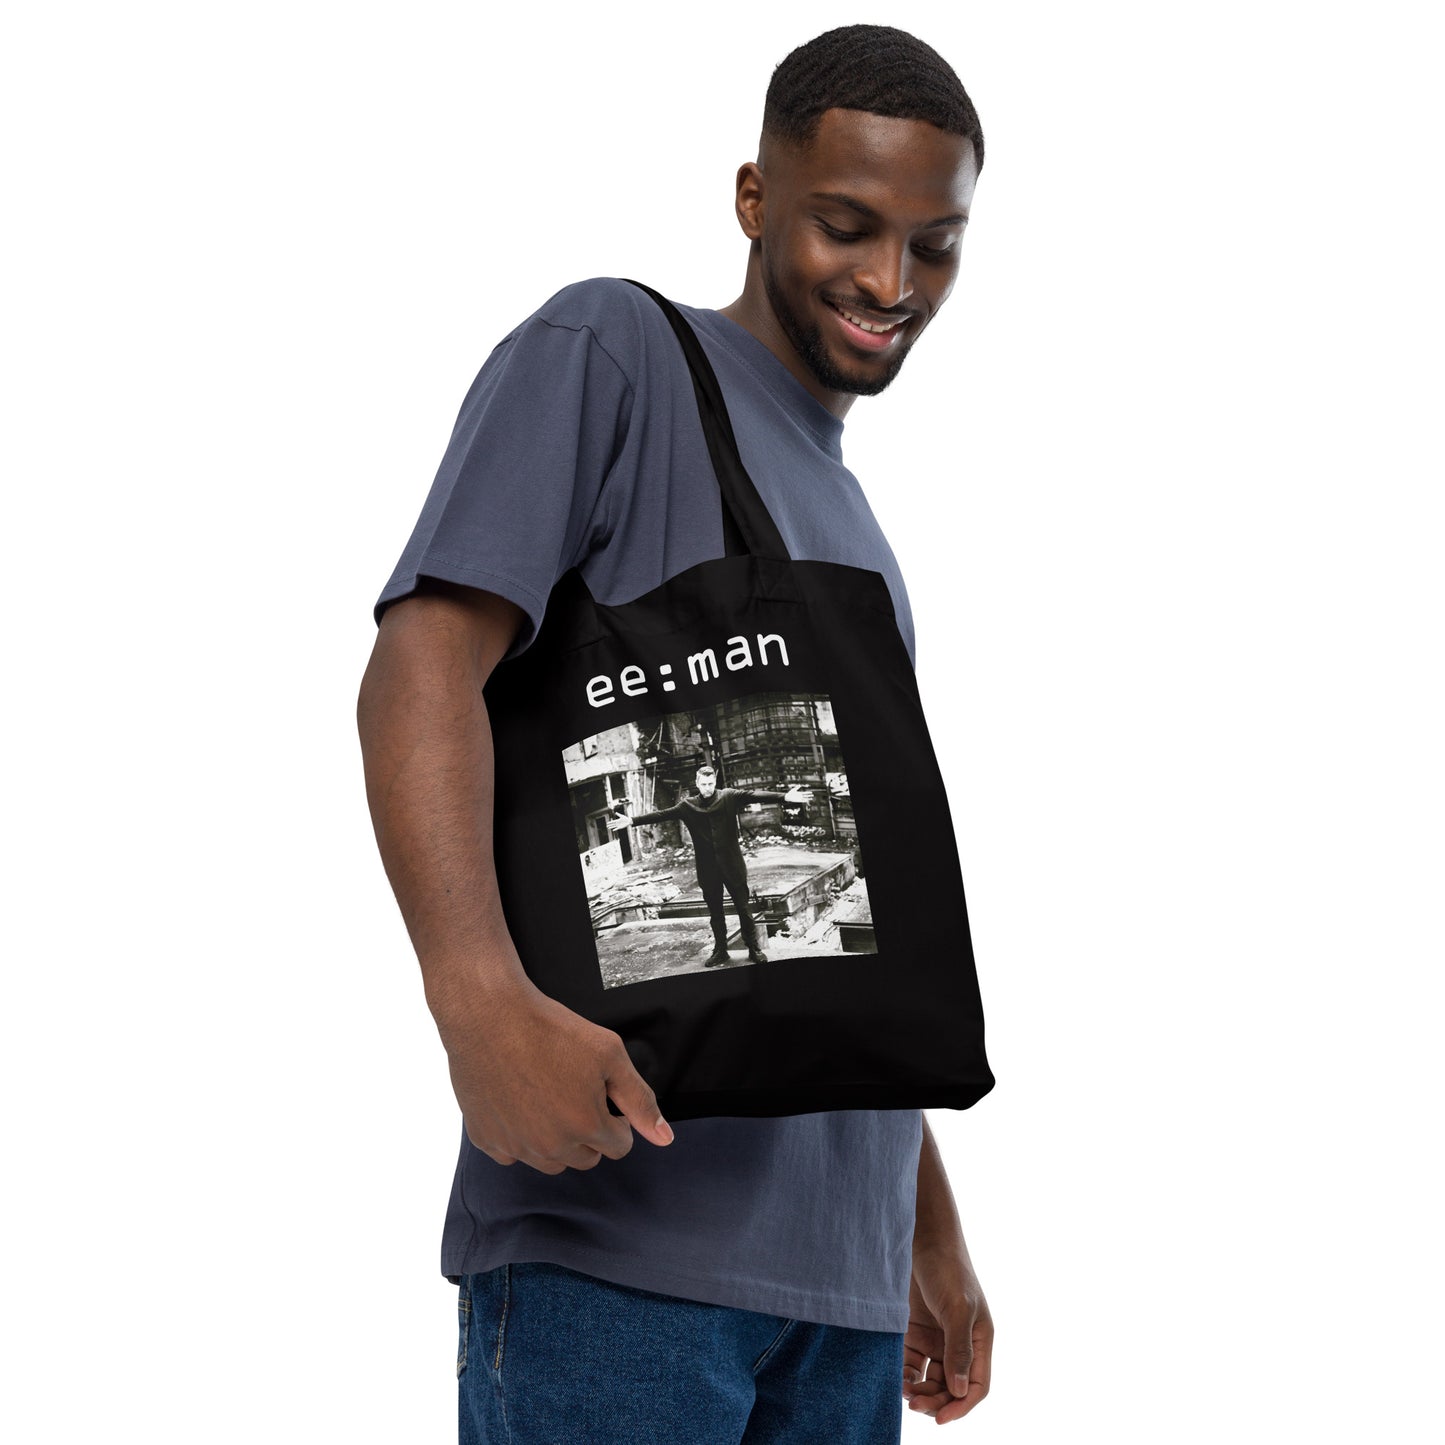 ee:man, official photo and logo, Organic fashion tote bag